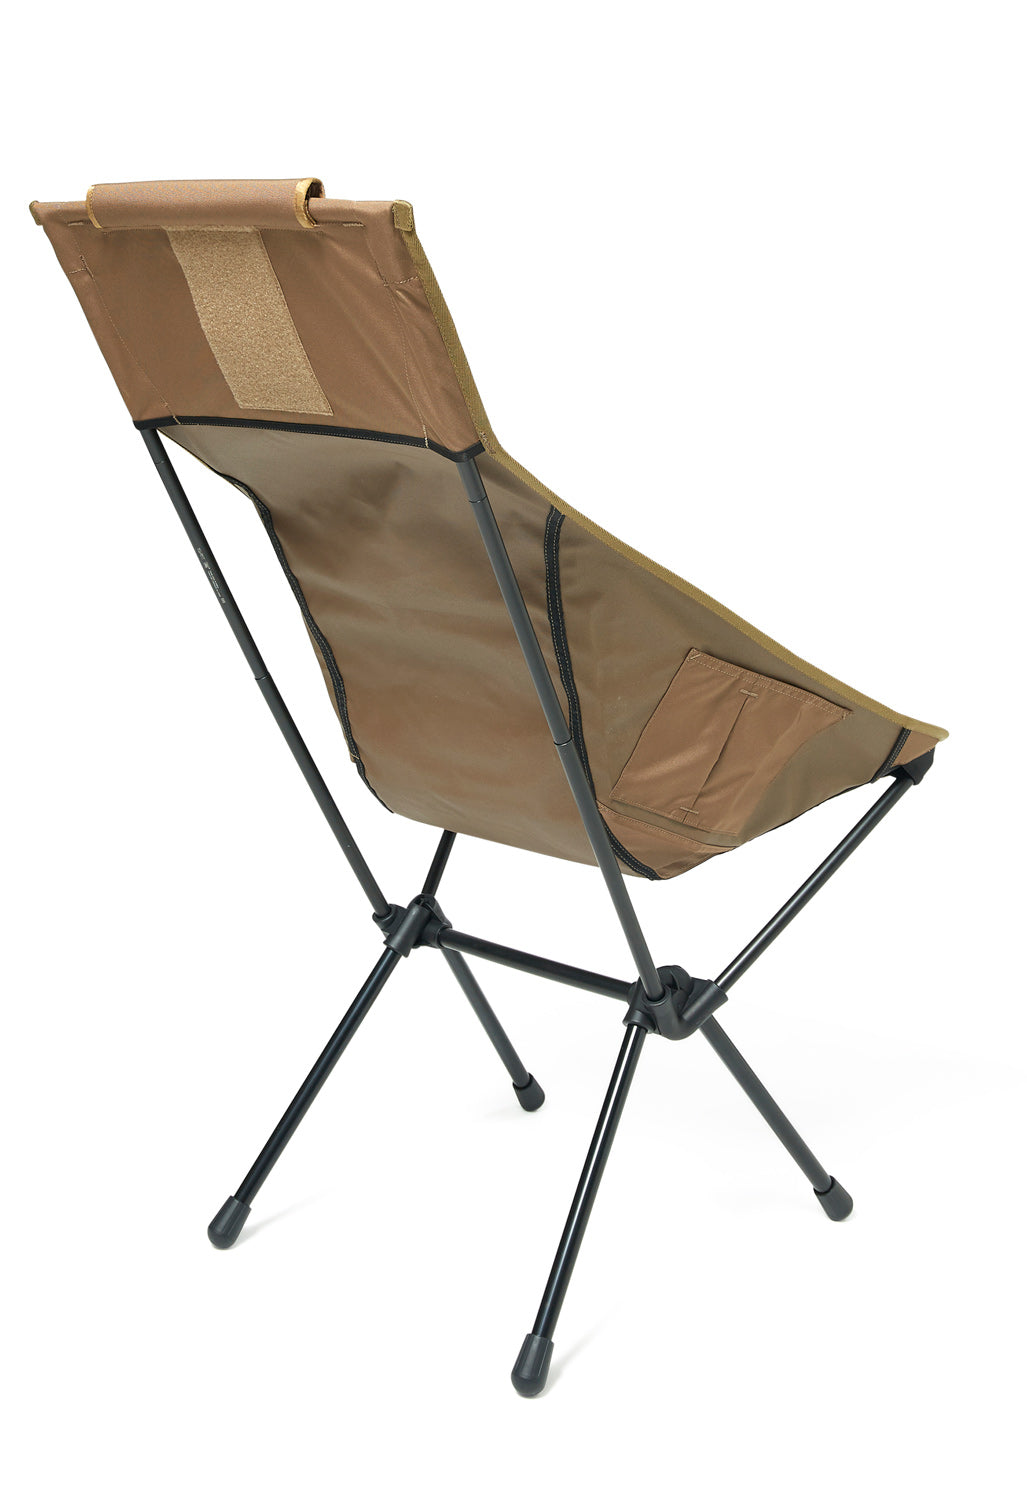 Helinox Tactical Sunset Chair - Coyote Tan